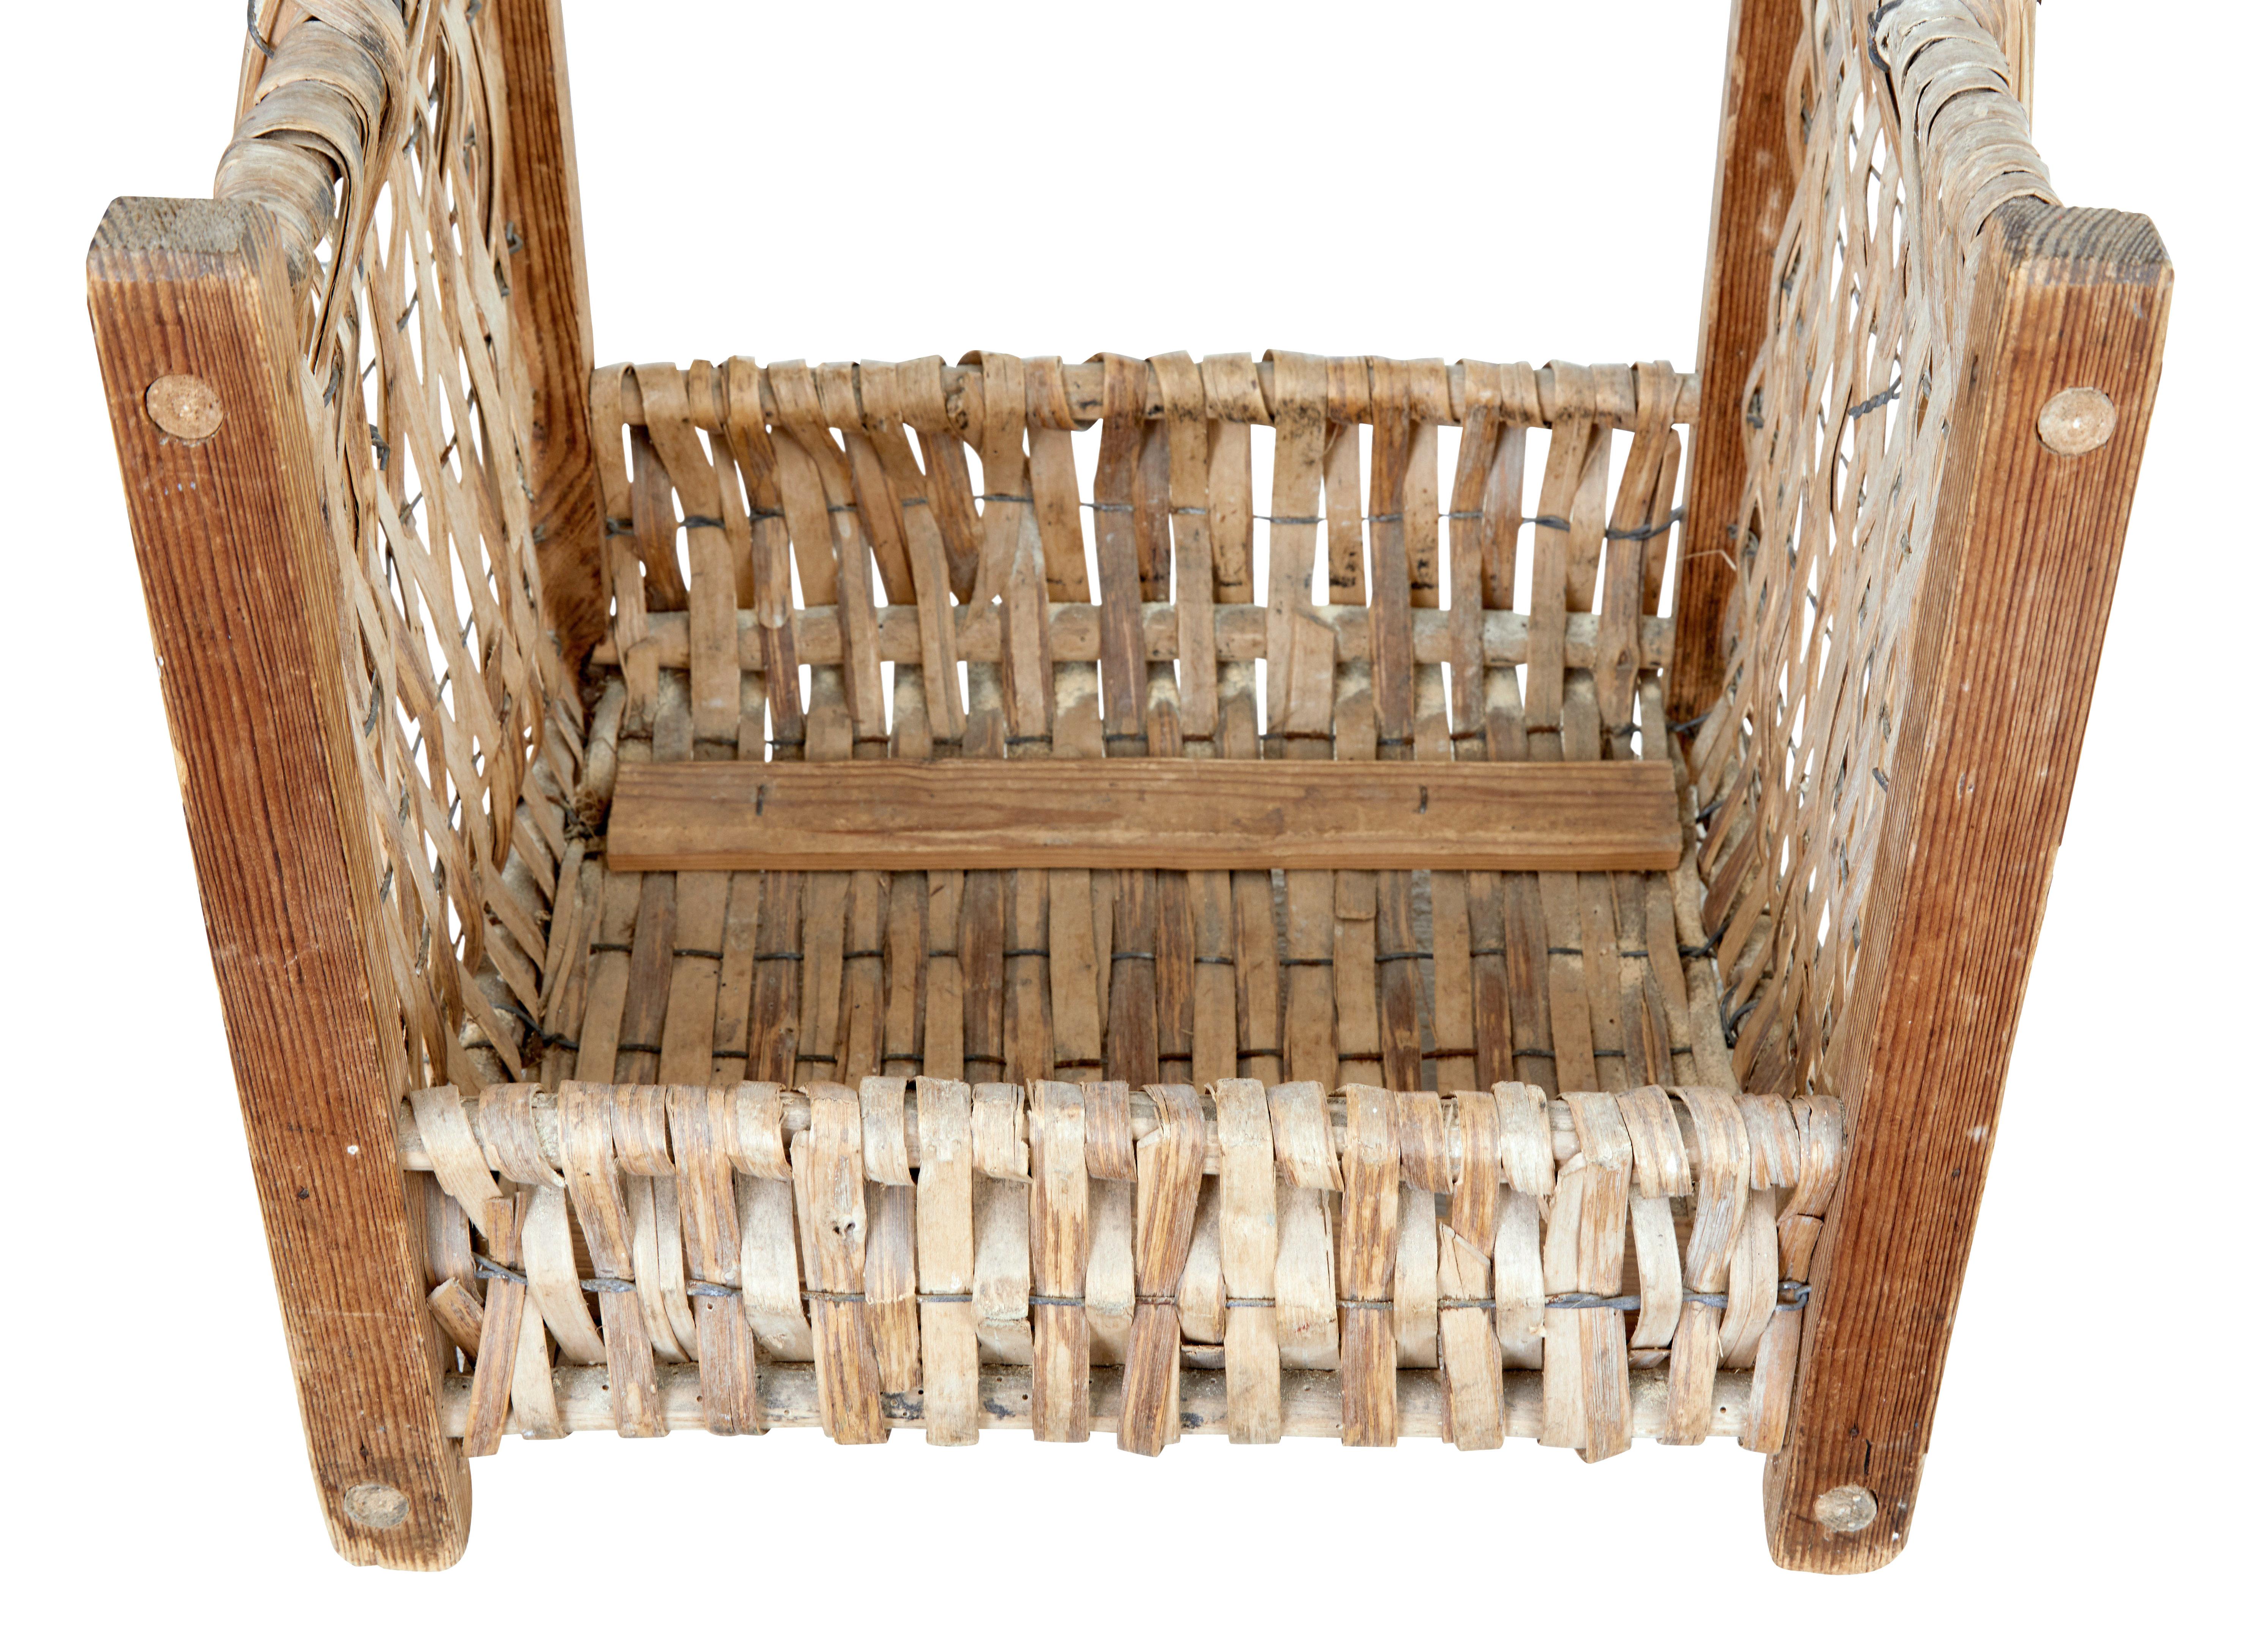 Hand-Crafted Late 19th Century Pine and Wicker Log Basket